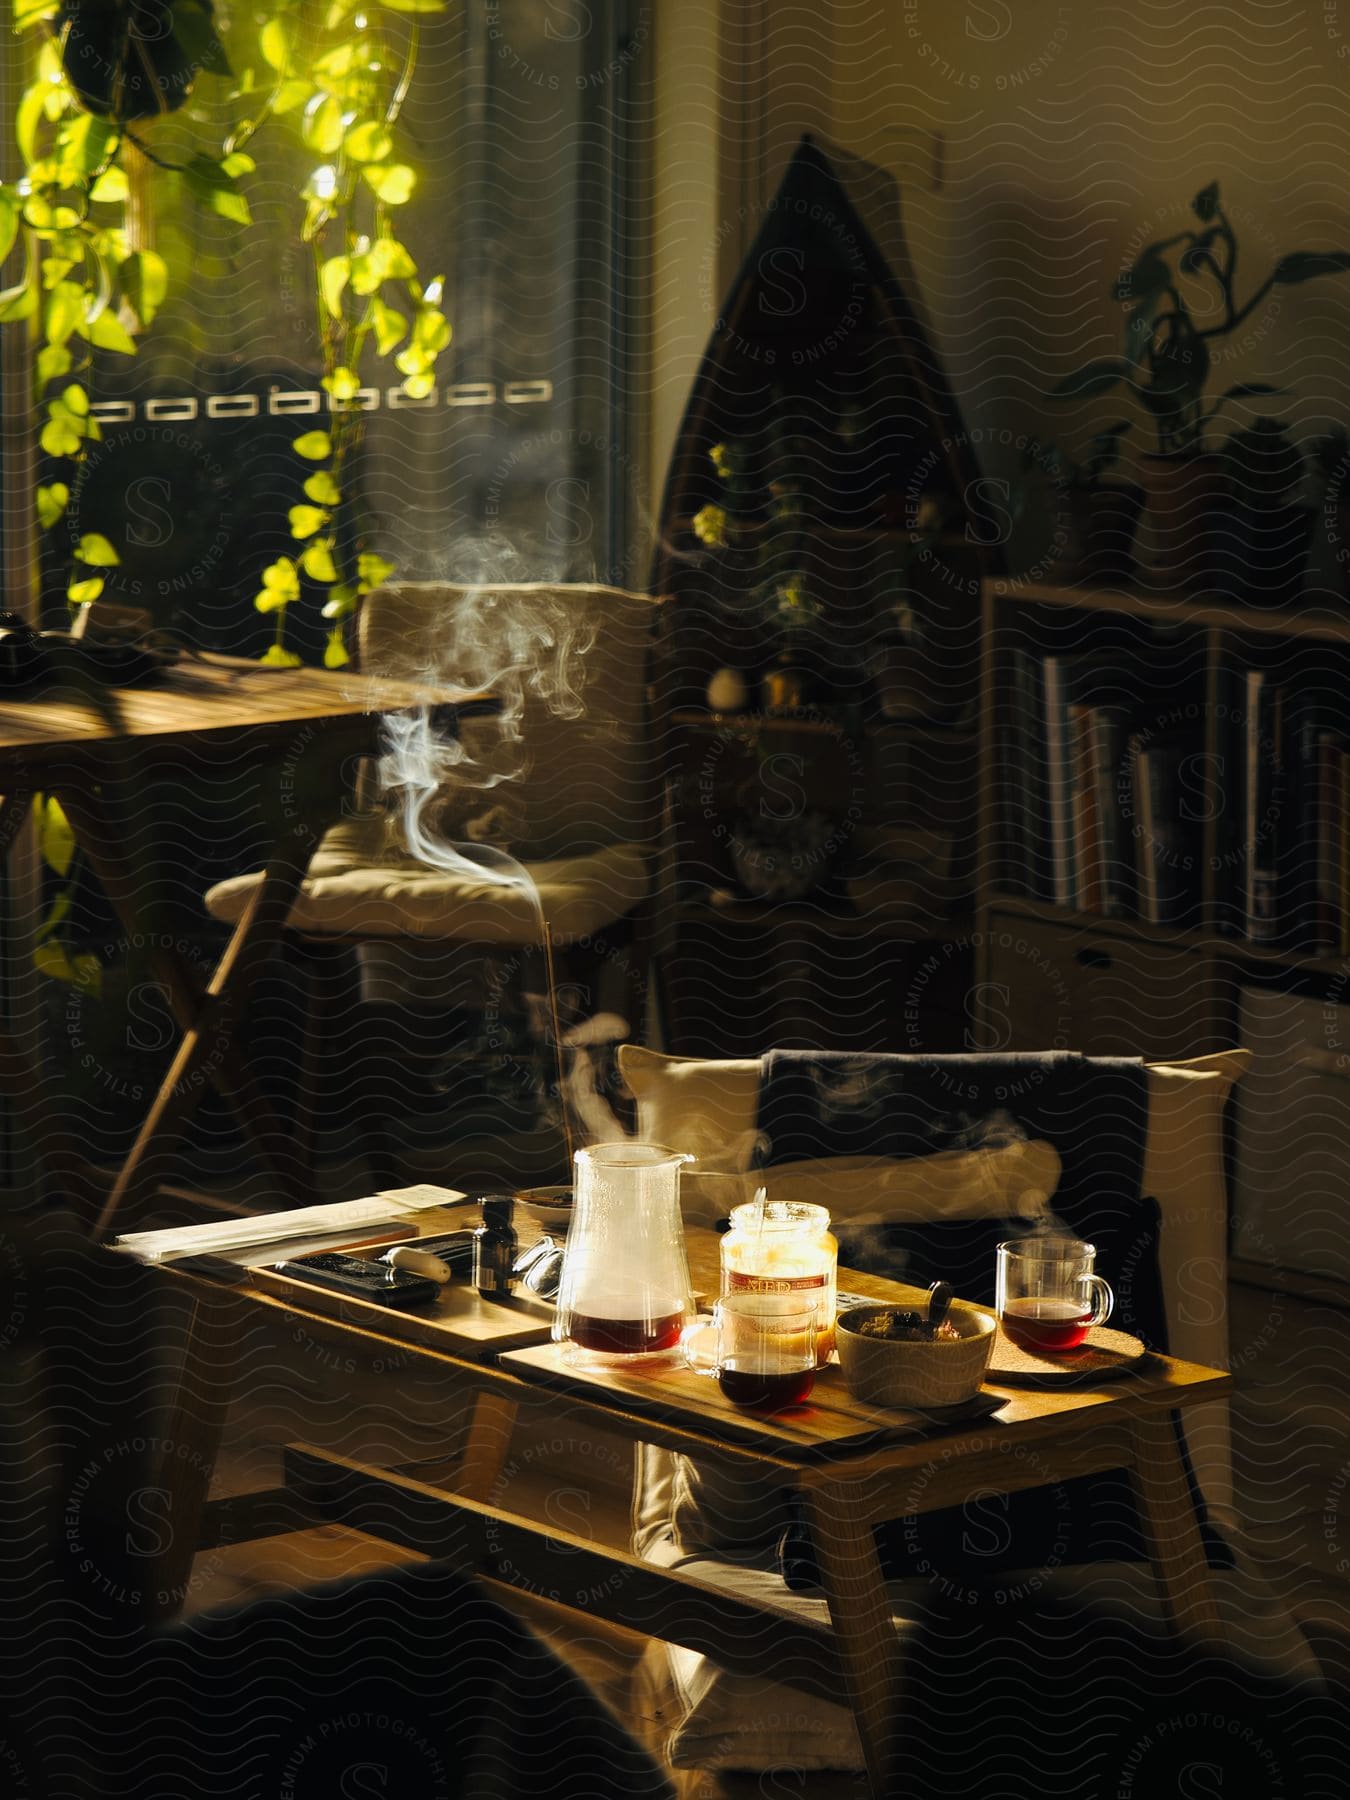 Indoor environment lit by sunlight, with a coffee table containing a jug, mug with tea and bowl, surrounded by plants and books.